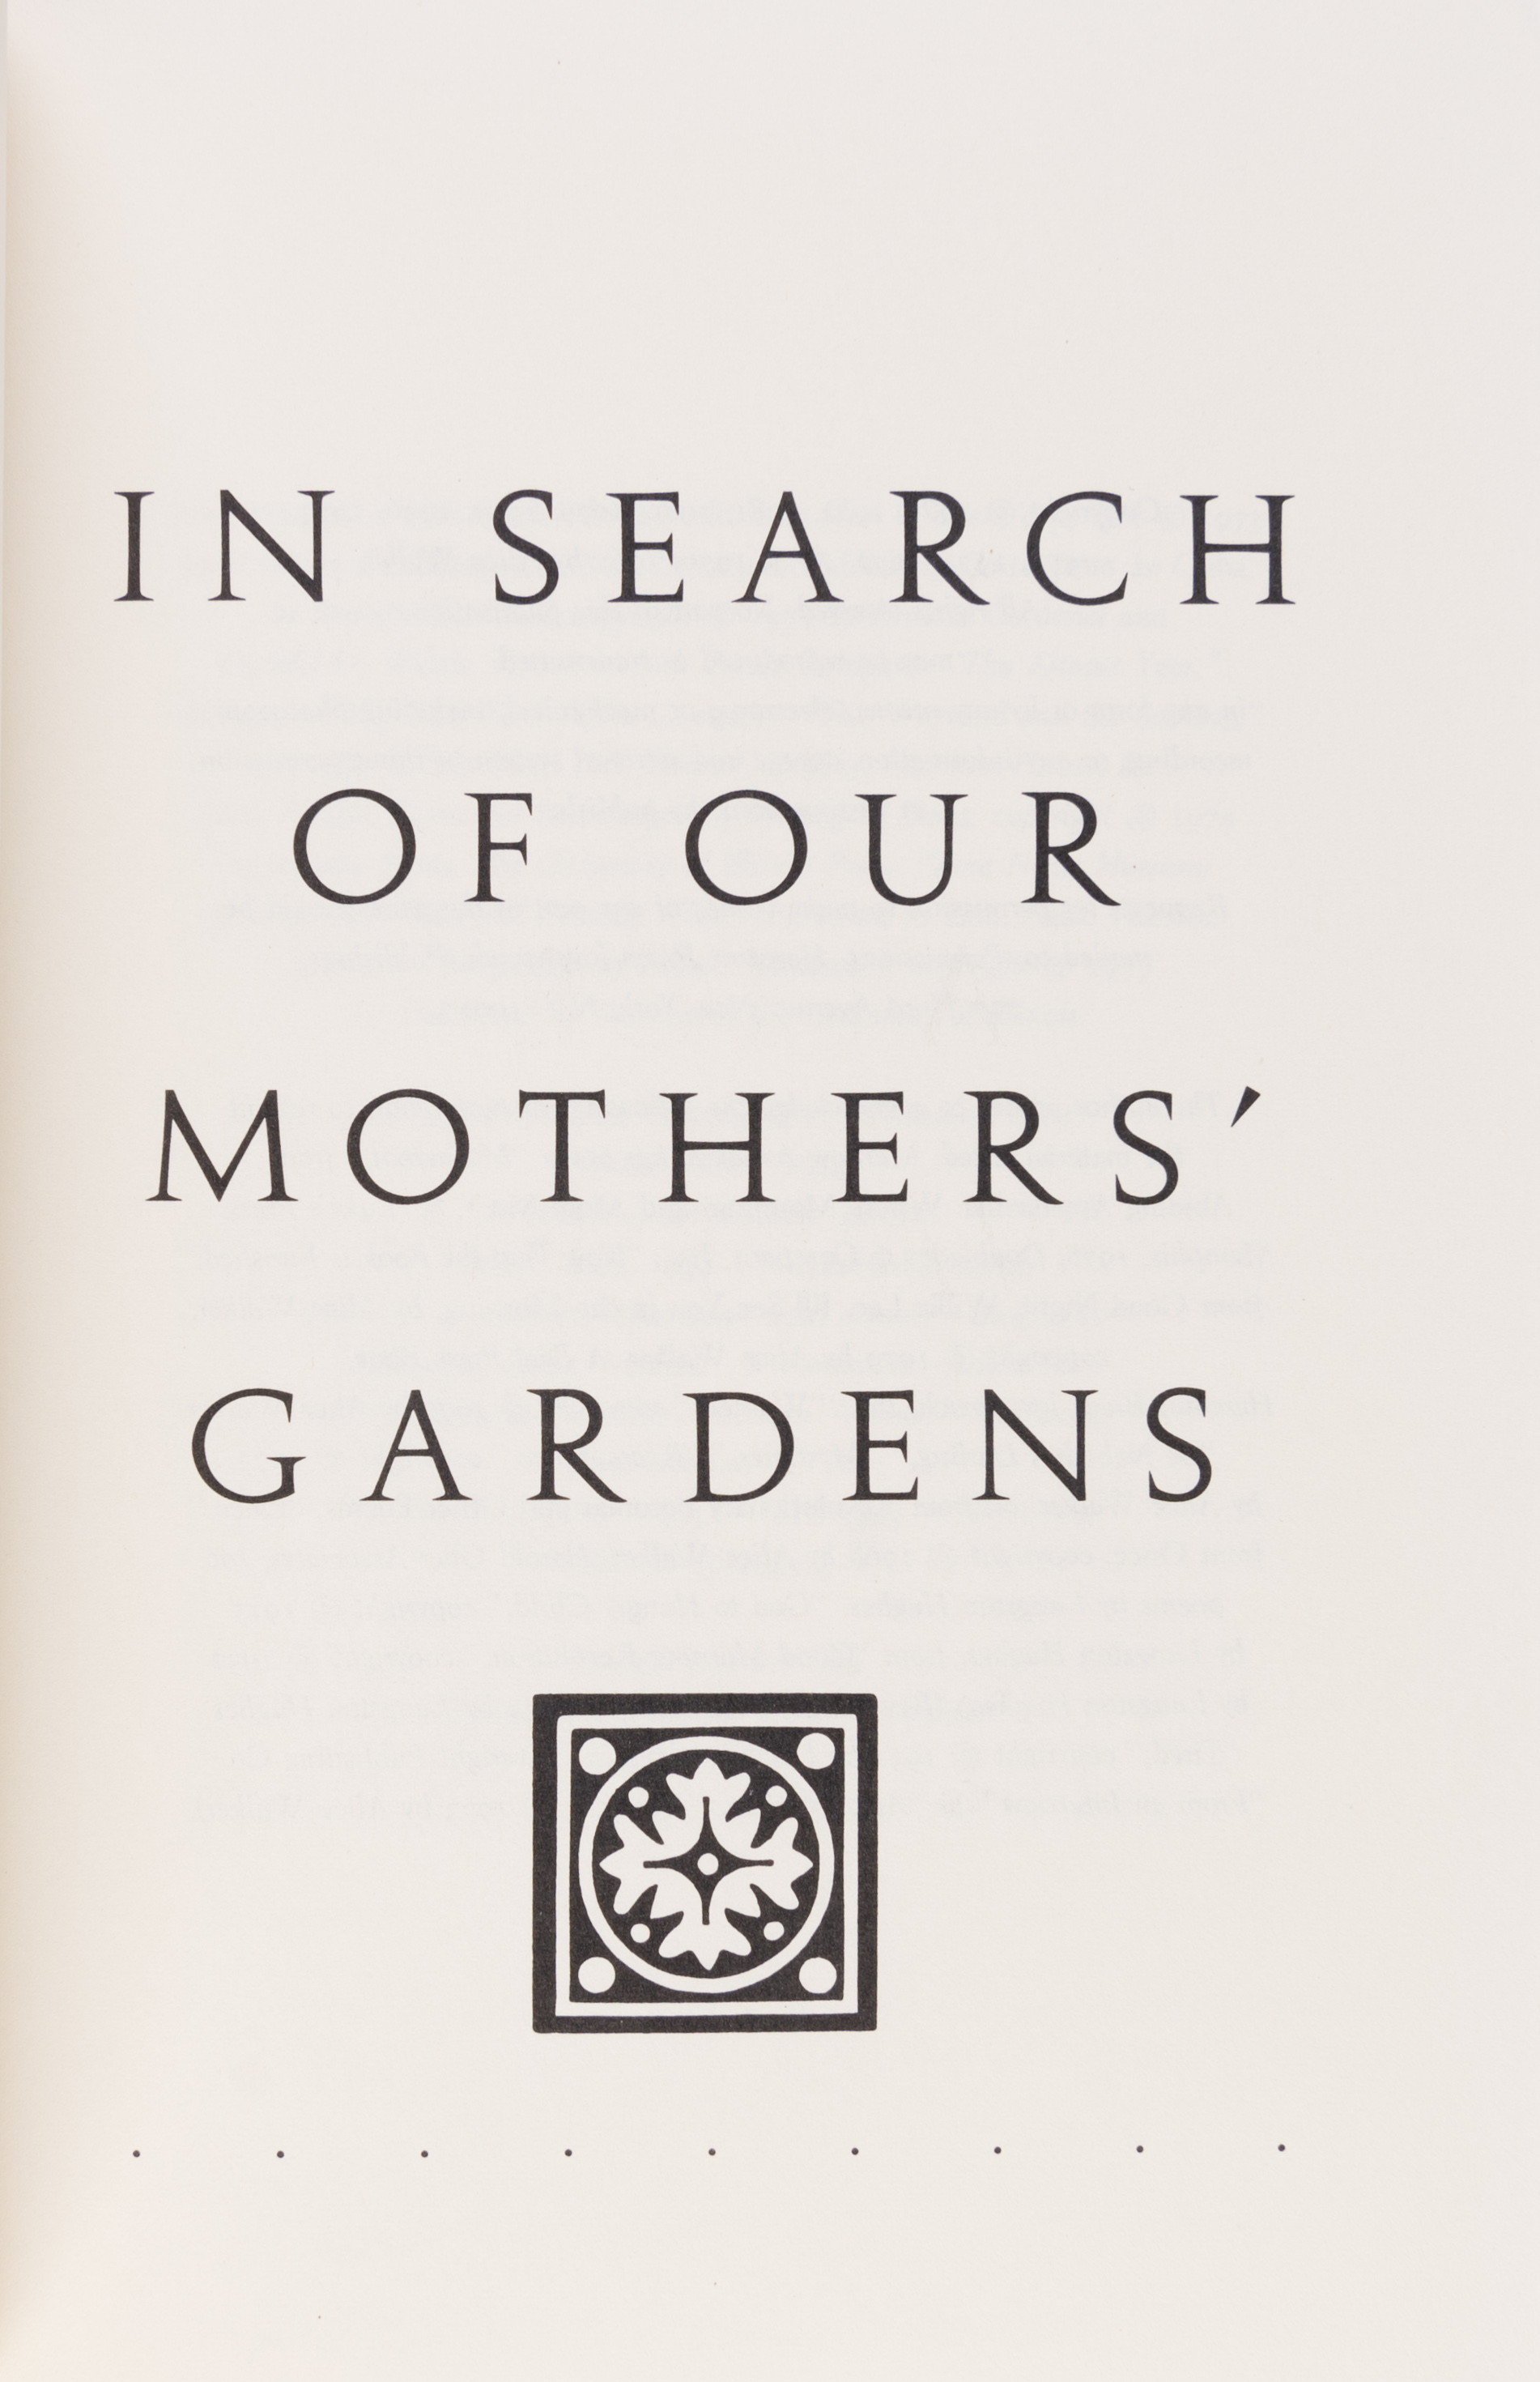 In Search of Our Mothers' Gardens - Wikipedia